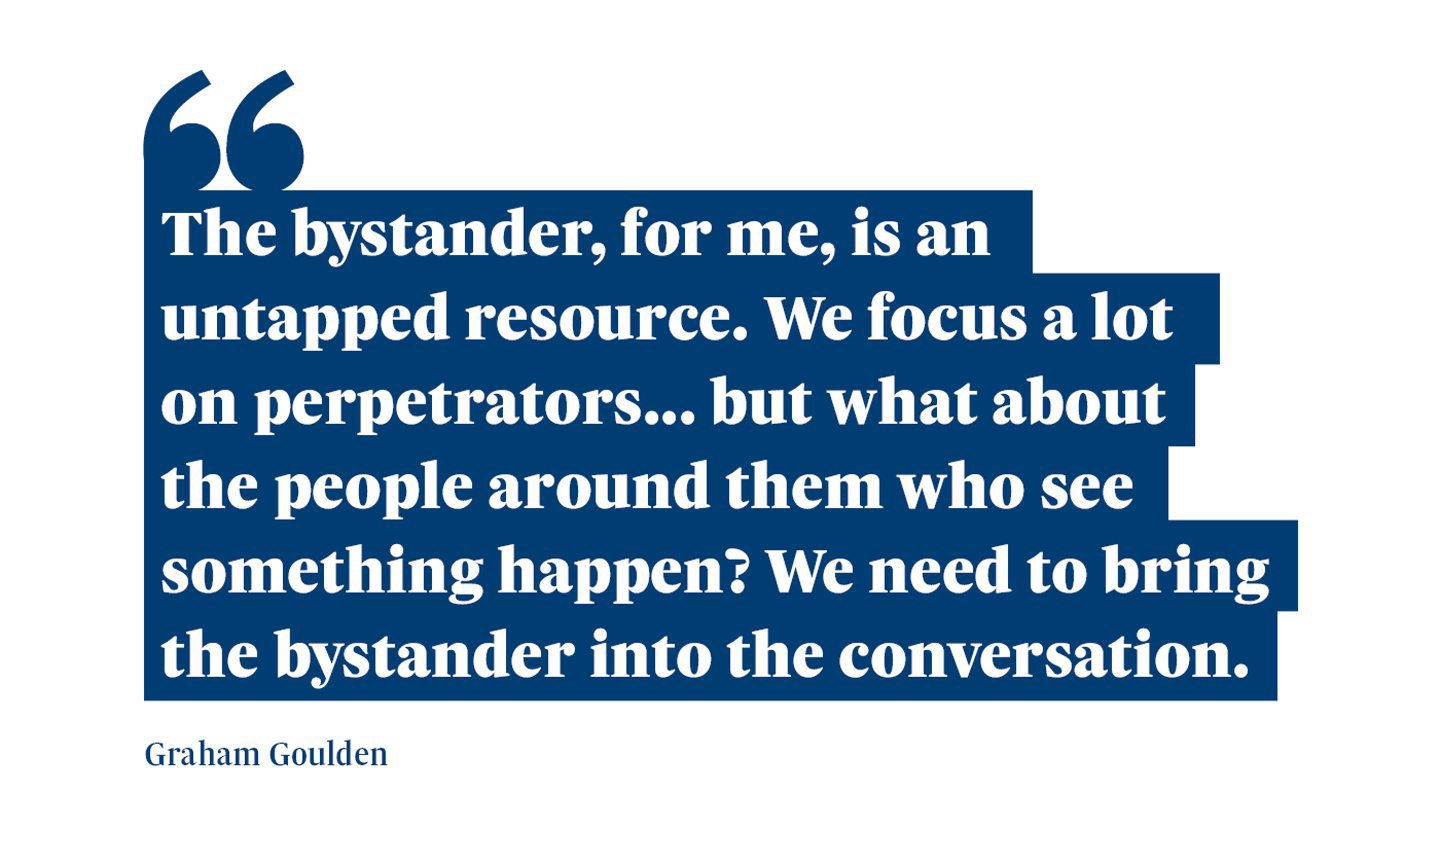 A quote from Graham Goulden saying: “The bystander, for me, is an untapped resource. We focus a lot on perpetrators... But what about the people around them who see something happen? We need to bring the bystander into the conversation."